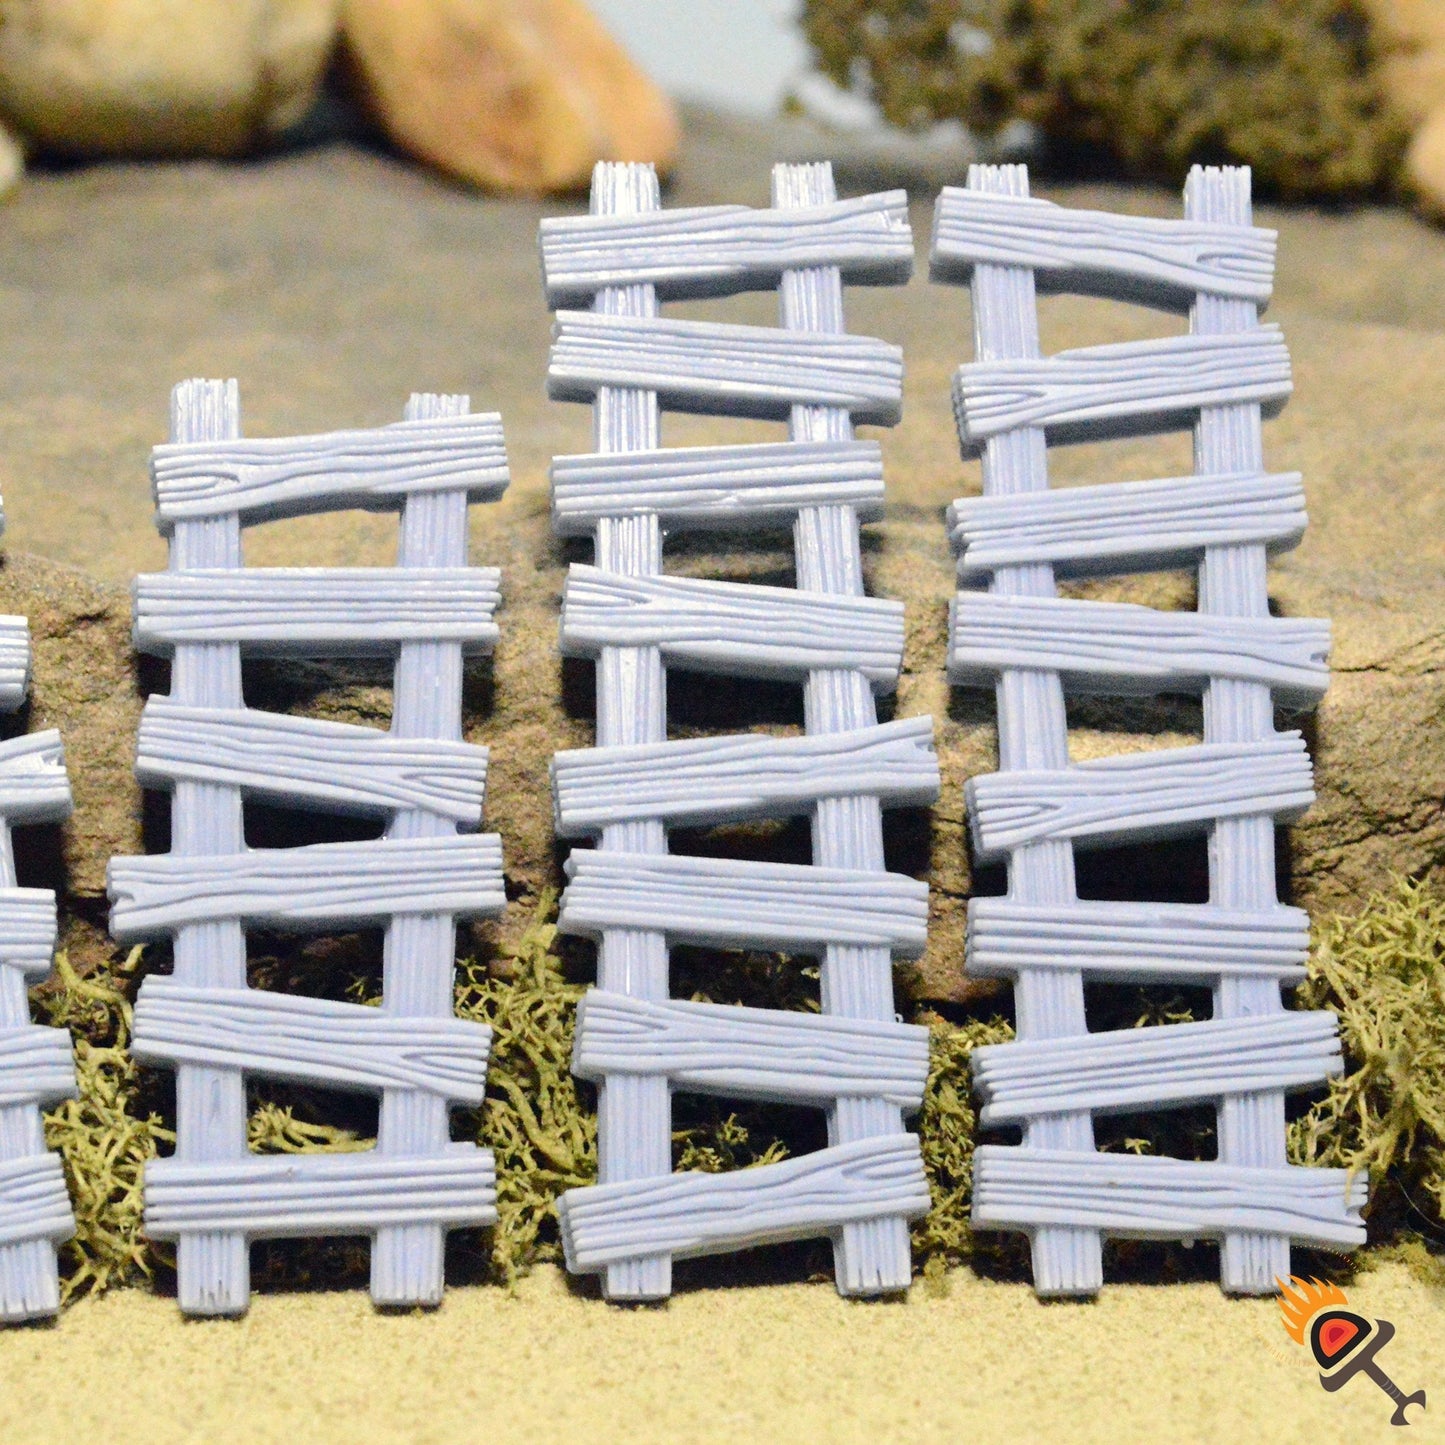 Miniature Wooden Ladders 28mm for D&D Terrain, DnD Pathfinder, Diorama, Tabletop Role-playing